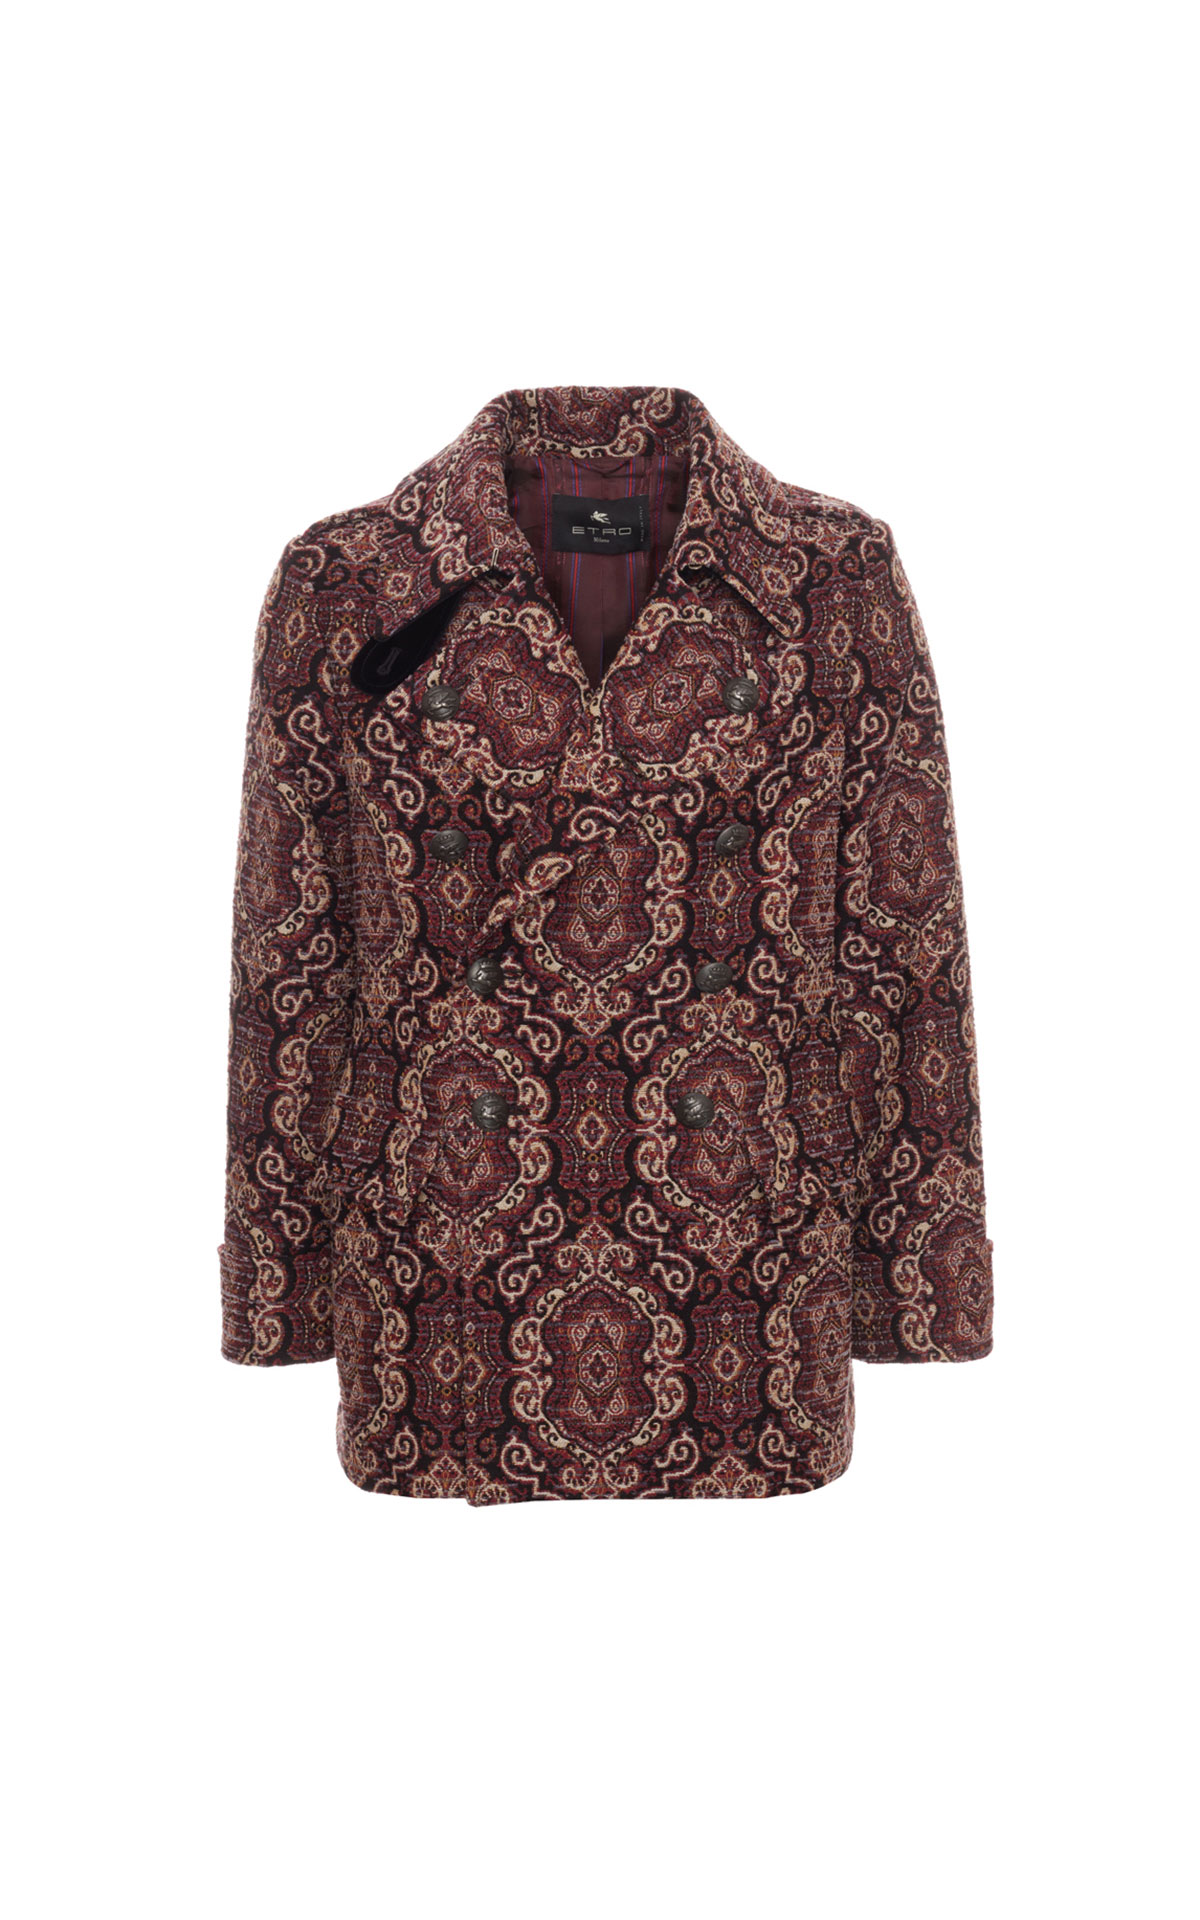 Etro Outerwear printed jacket from Bicester Village